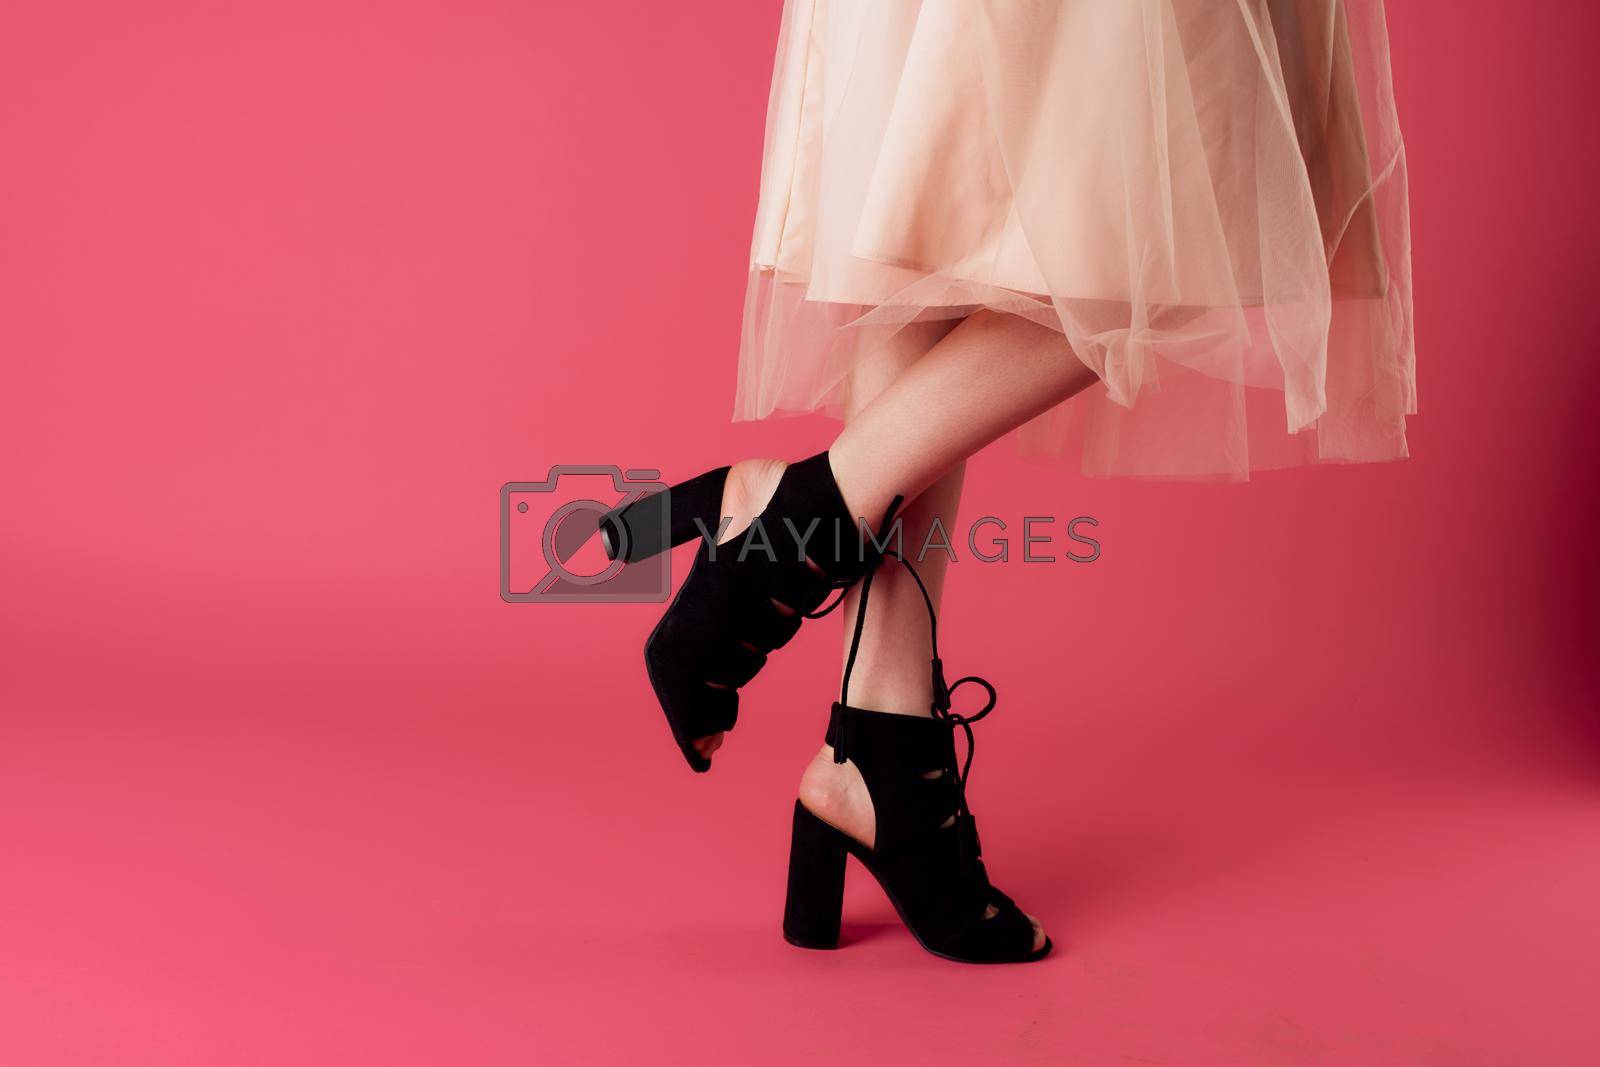 Royalty free image of Womens feet fashionable shoes charm pink background shopping by SHOTPRIME